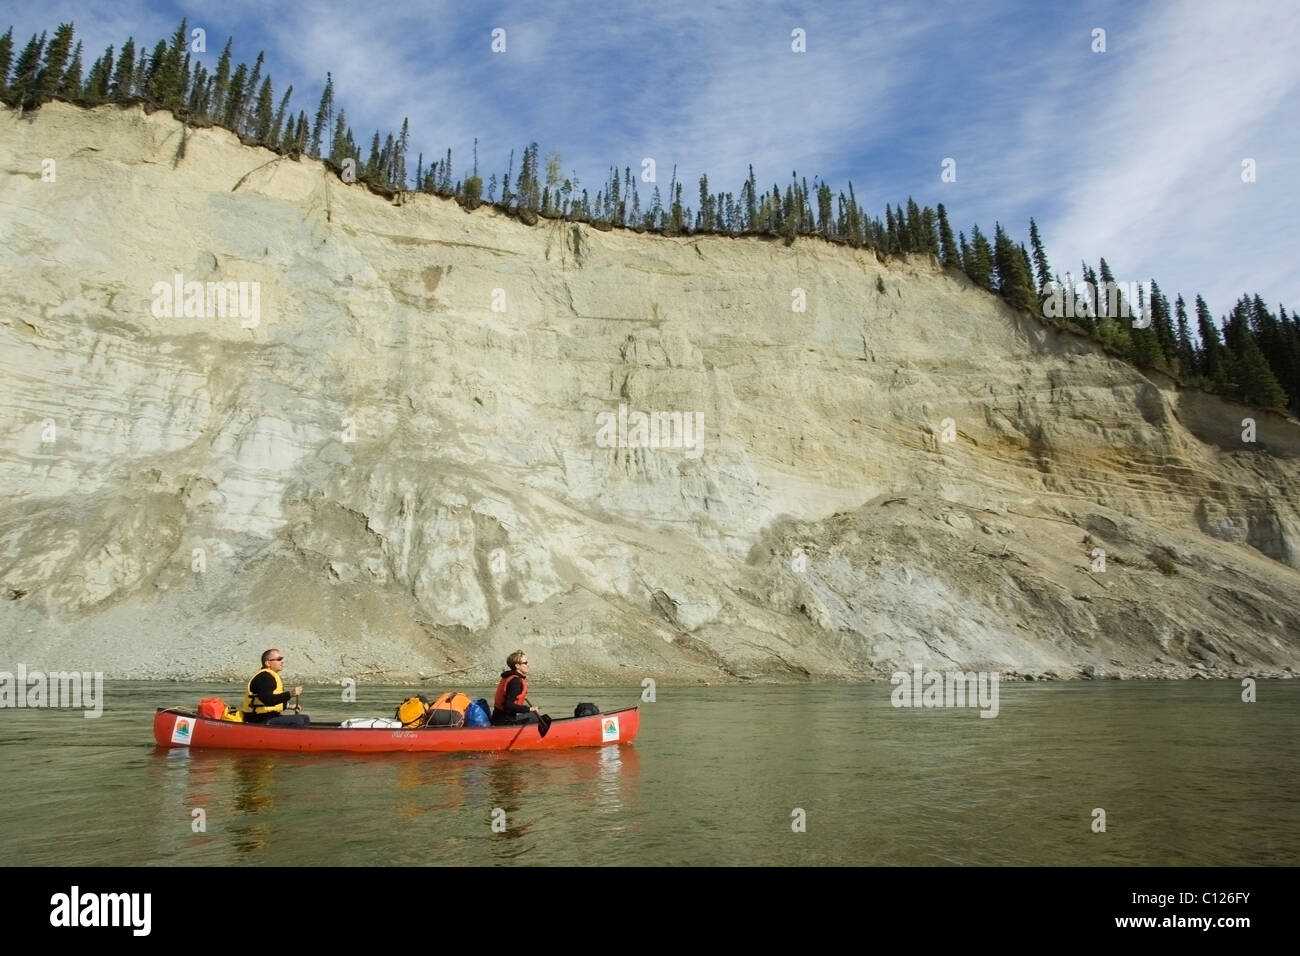 Couple, man and woman paddling a canoe, canoeing, river shaping landscape, erosion in soft sandstone, high cut bank, cliff Stock Photo